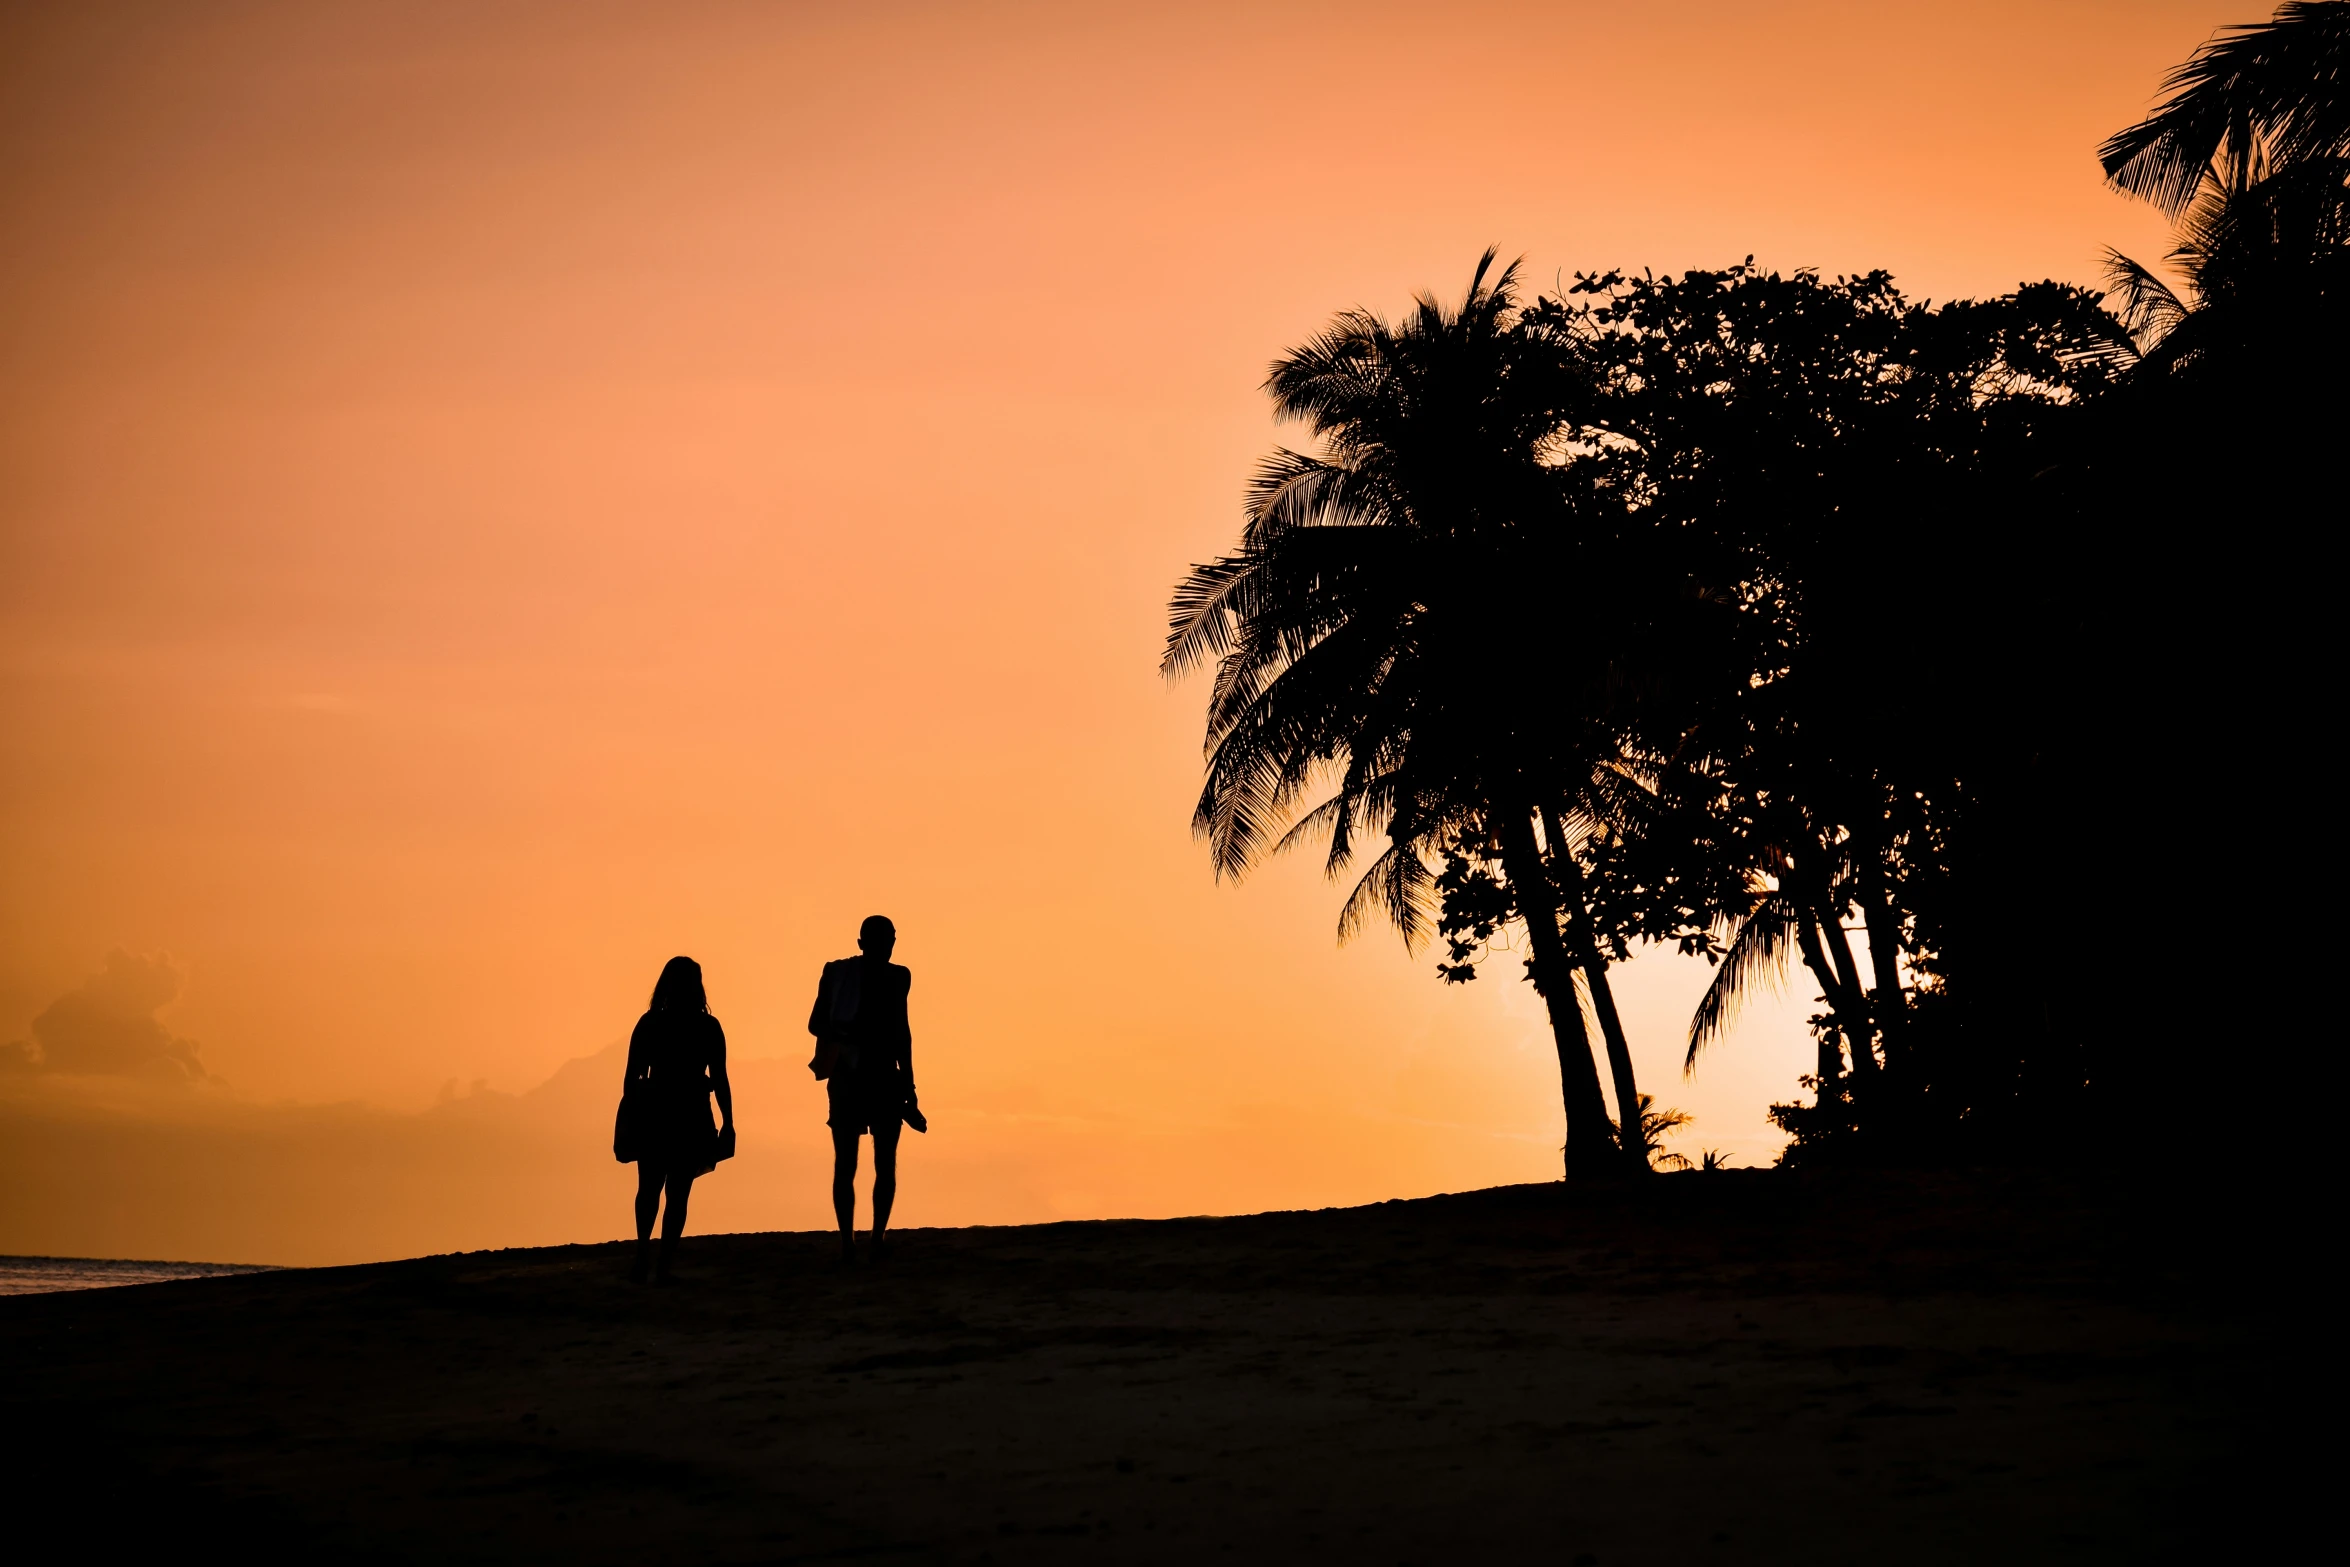 a couple silhouetted against an orange sky by some trees